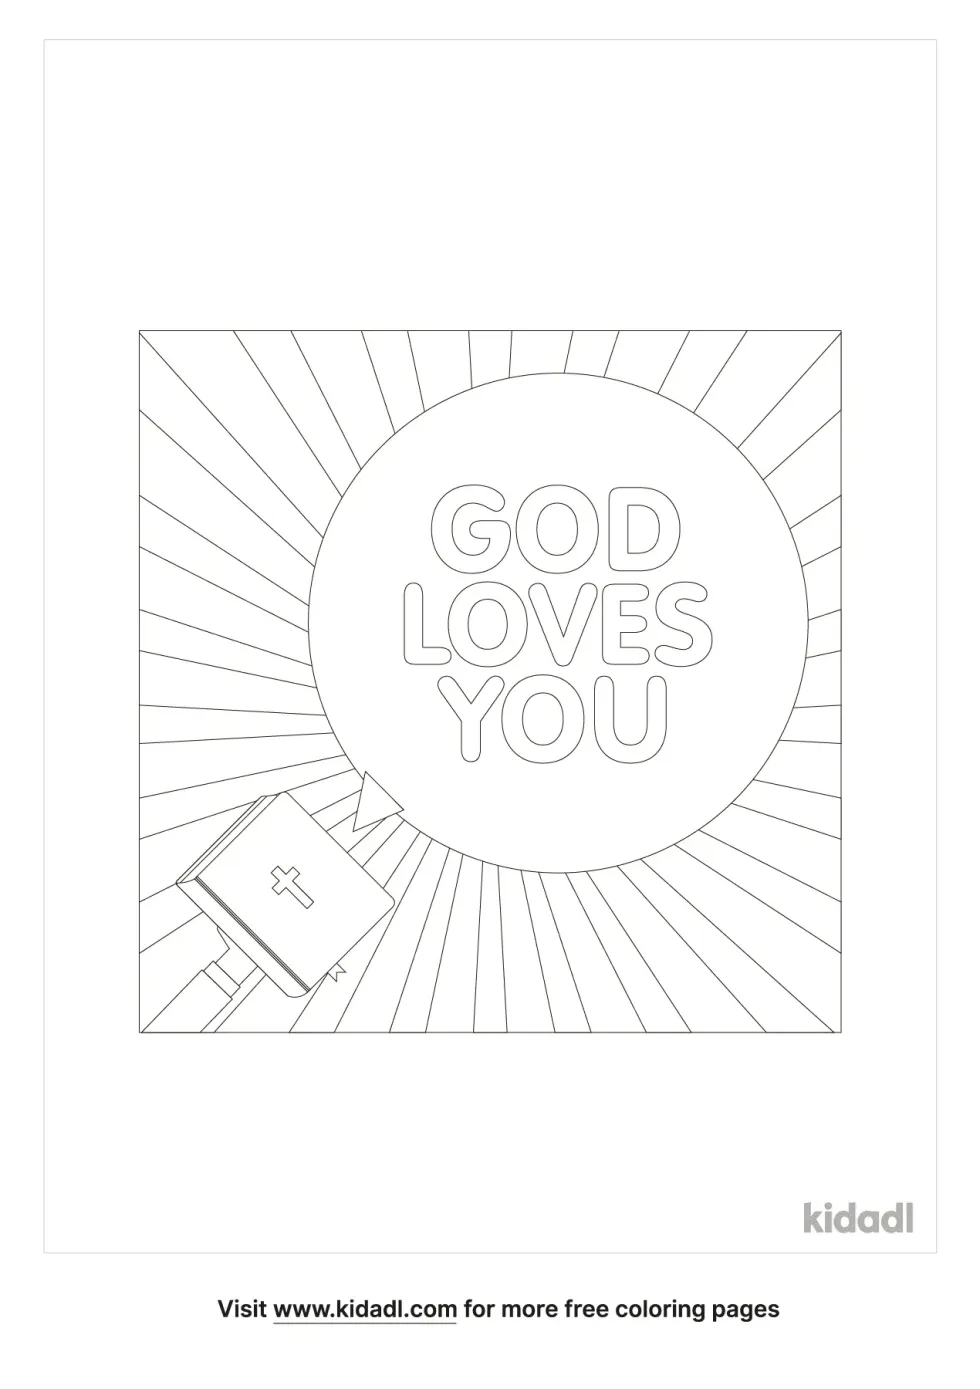 The Length Of God's Love Is Forever Coloring Page